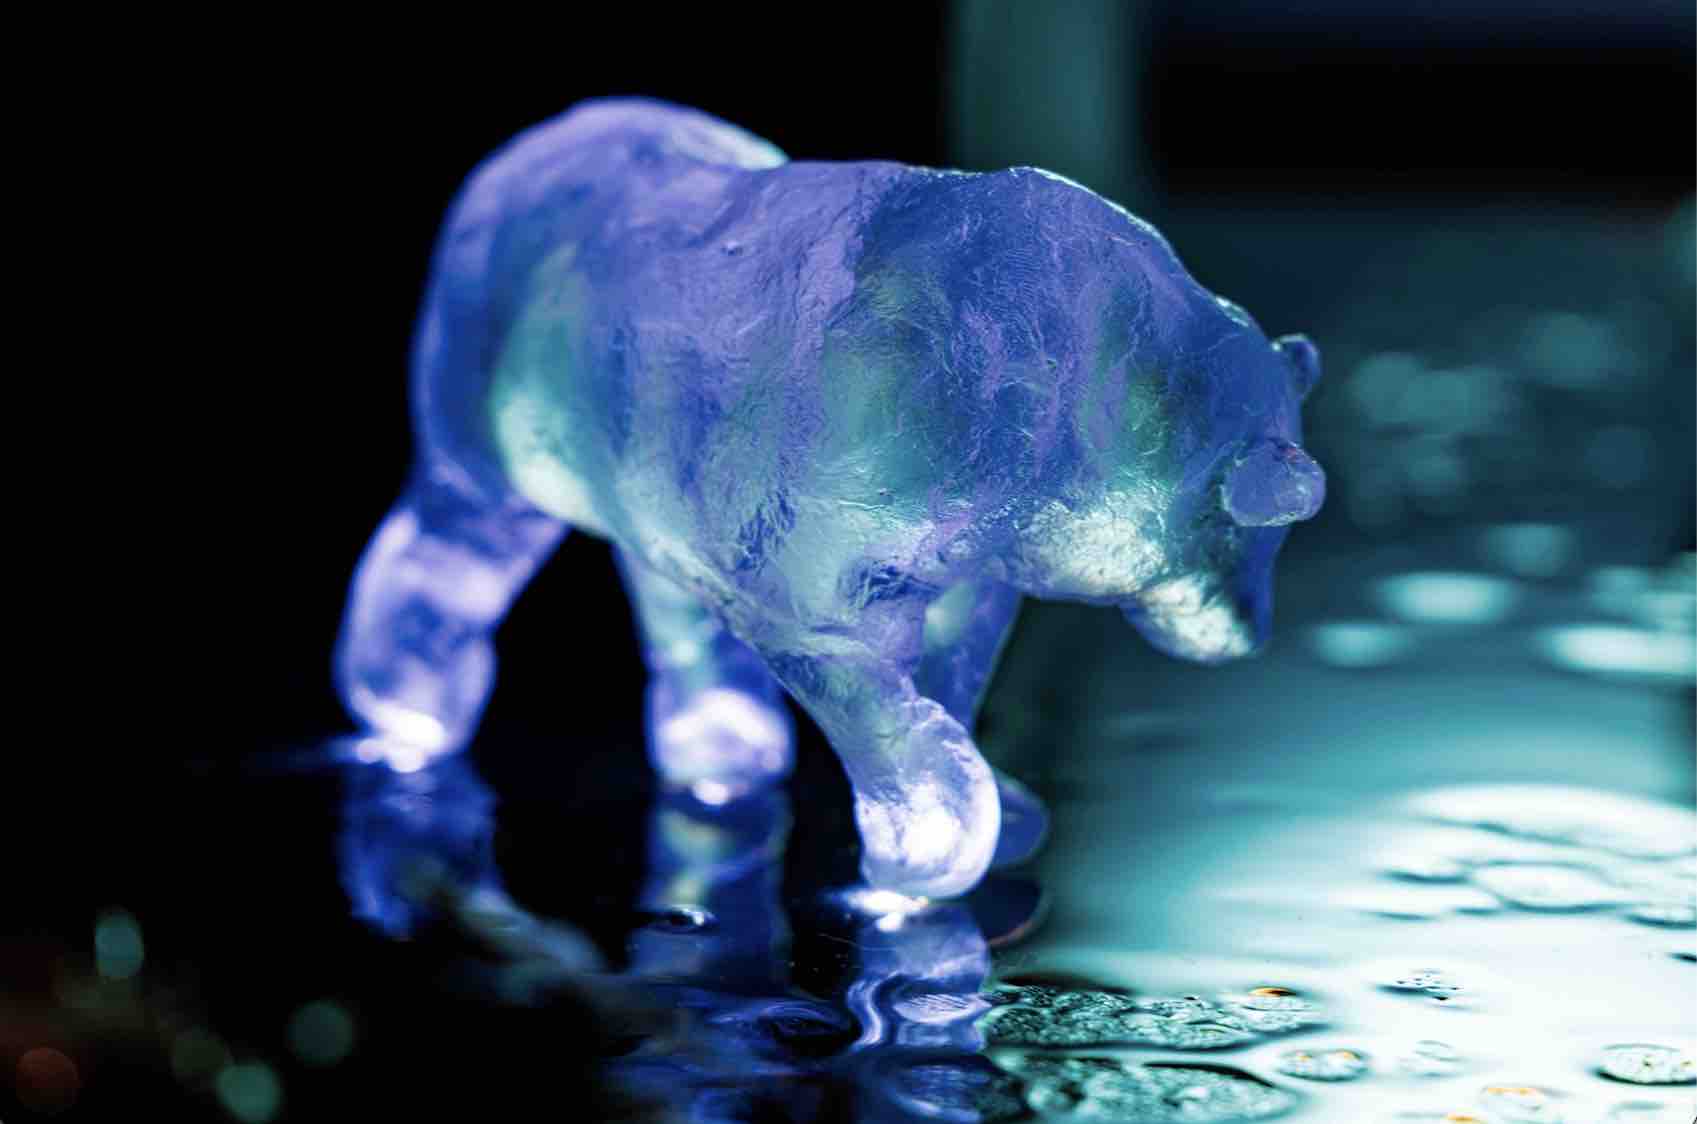 A translucent cast glass bear paws at the dark shine of melting ice as it pools at his feet.